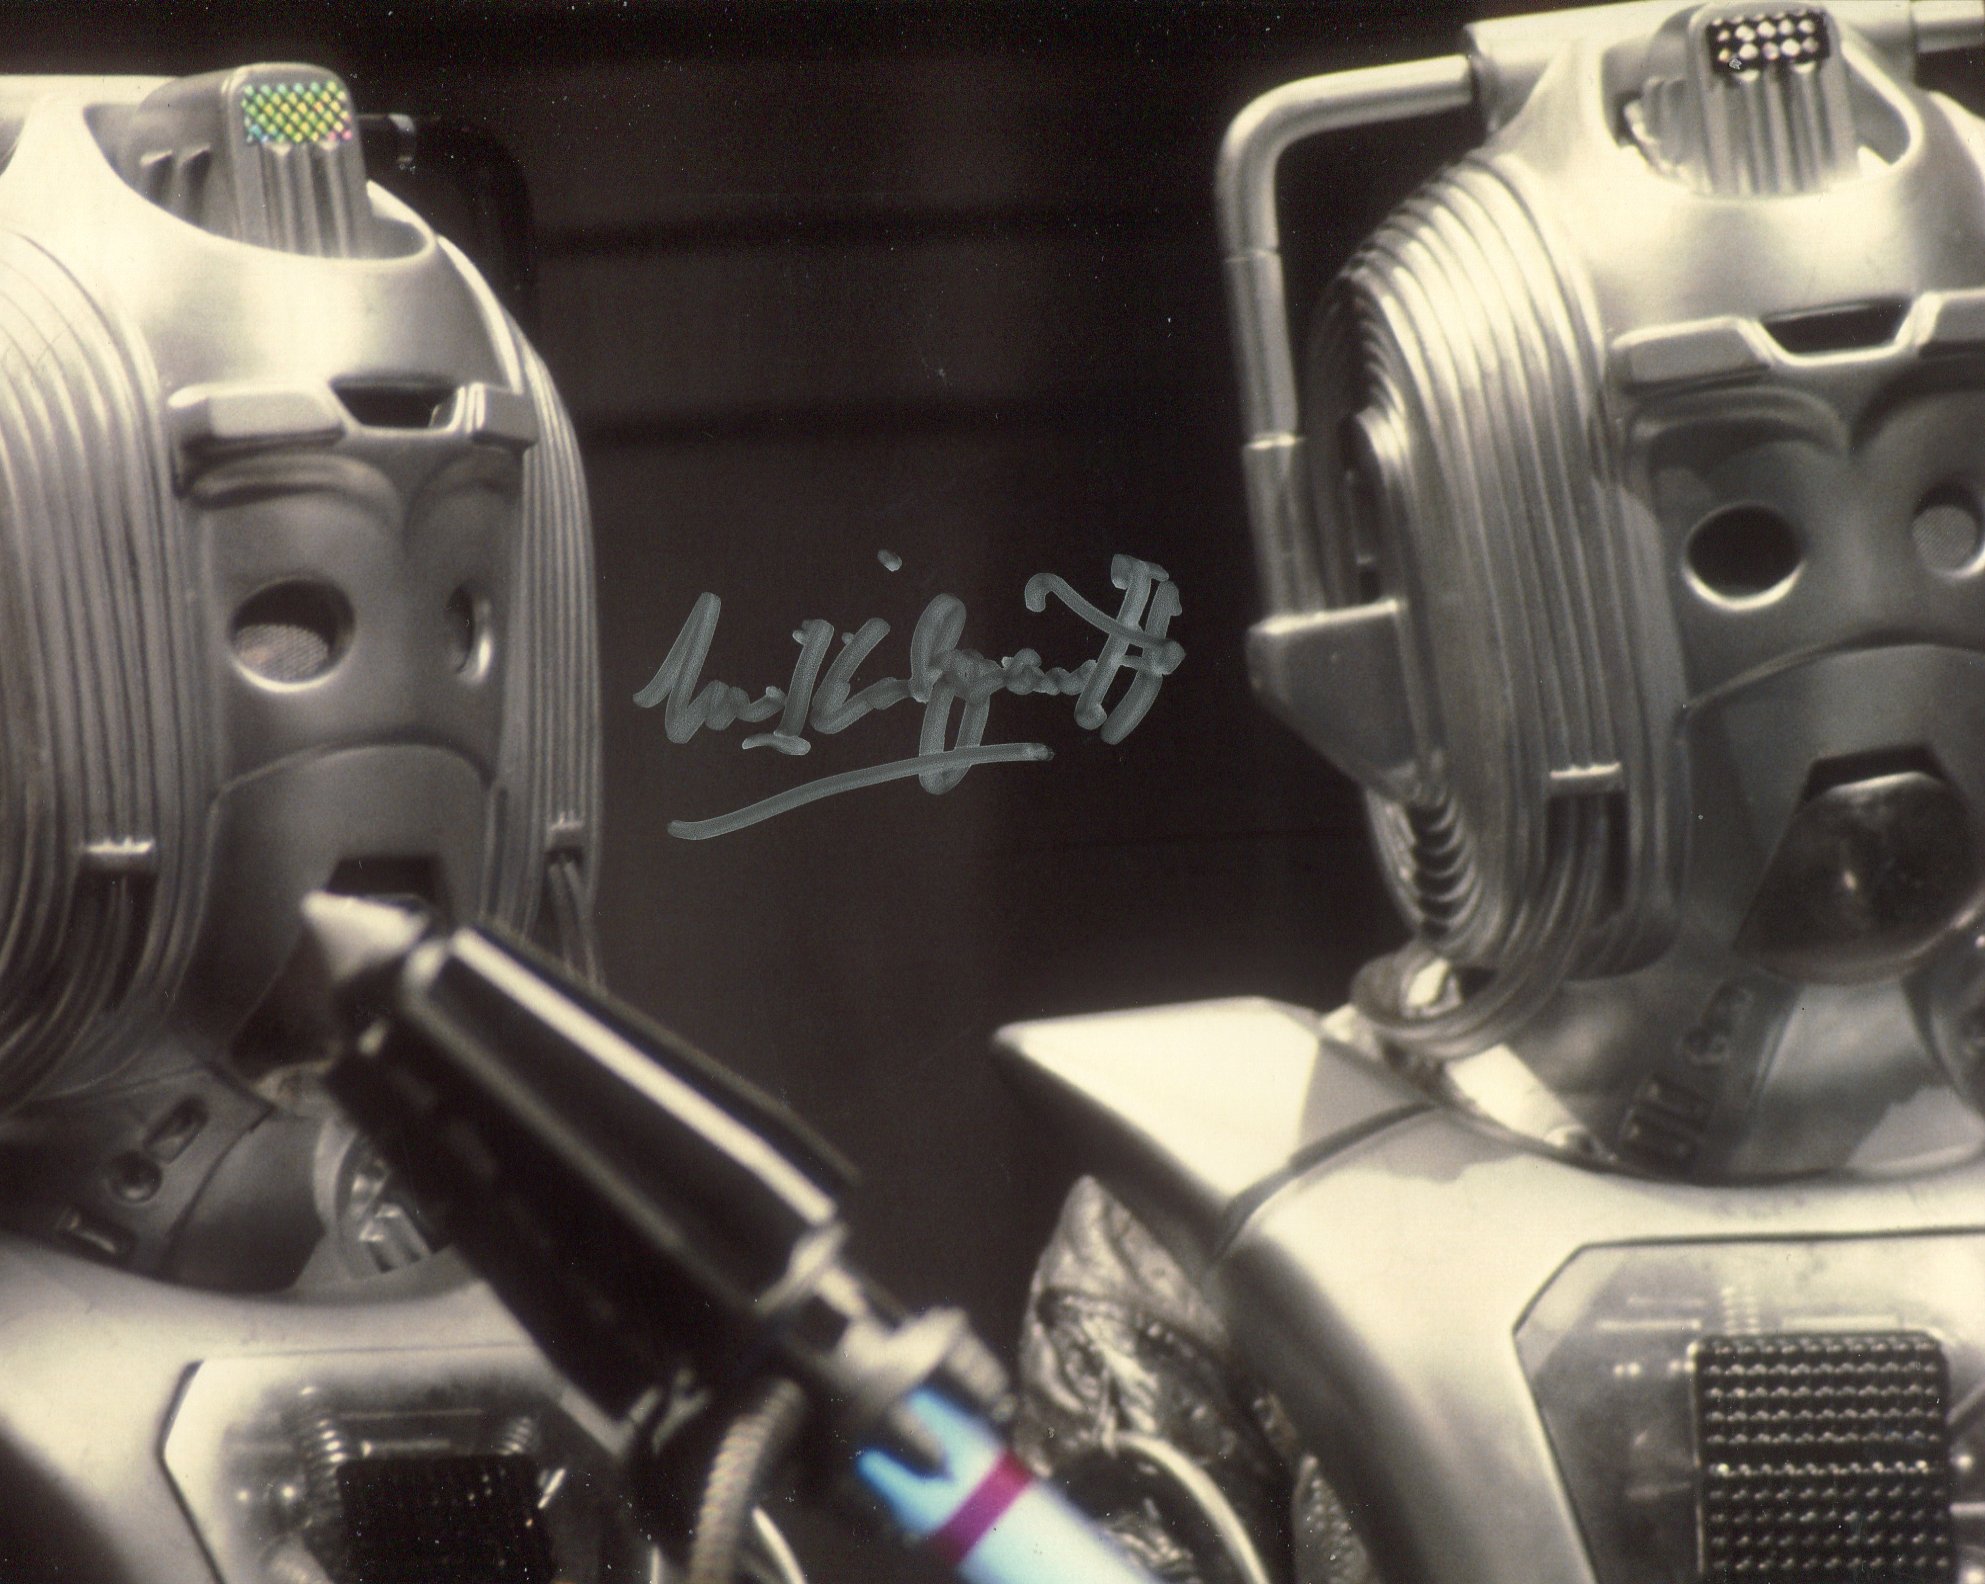 Doctor Who & the Cybermen 8x10 photo signed by actor Michael Kilgarriff. Good condition. All